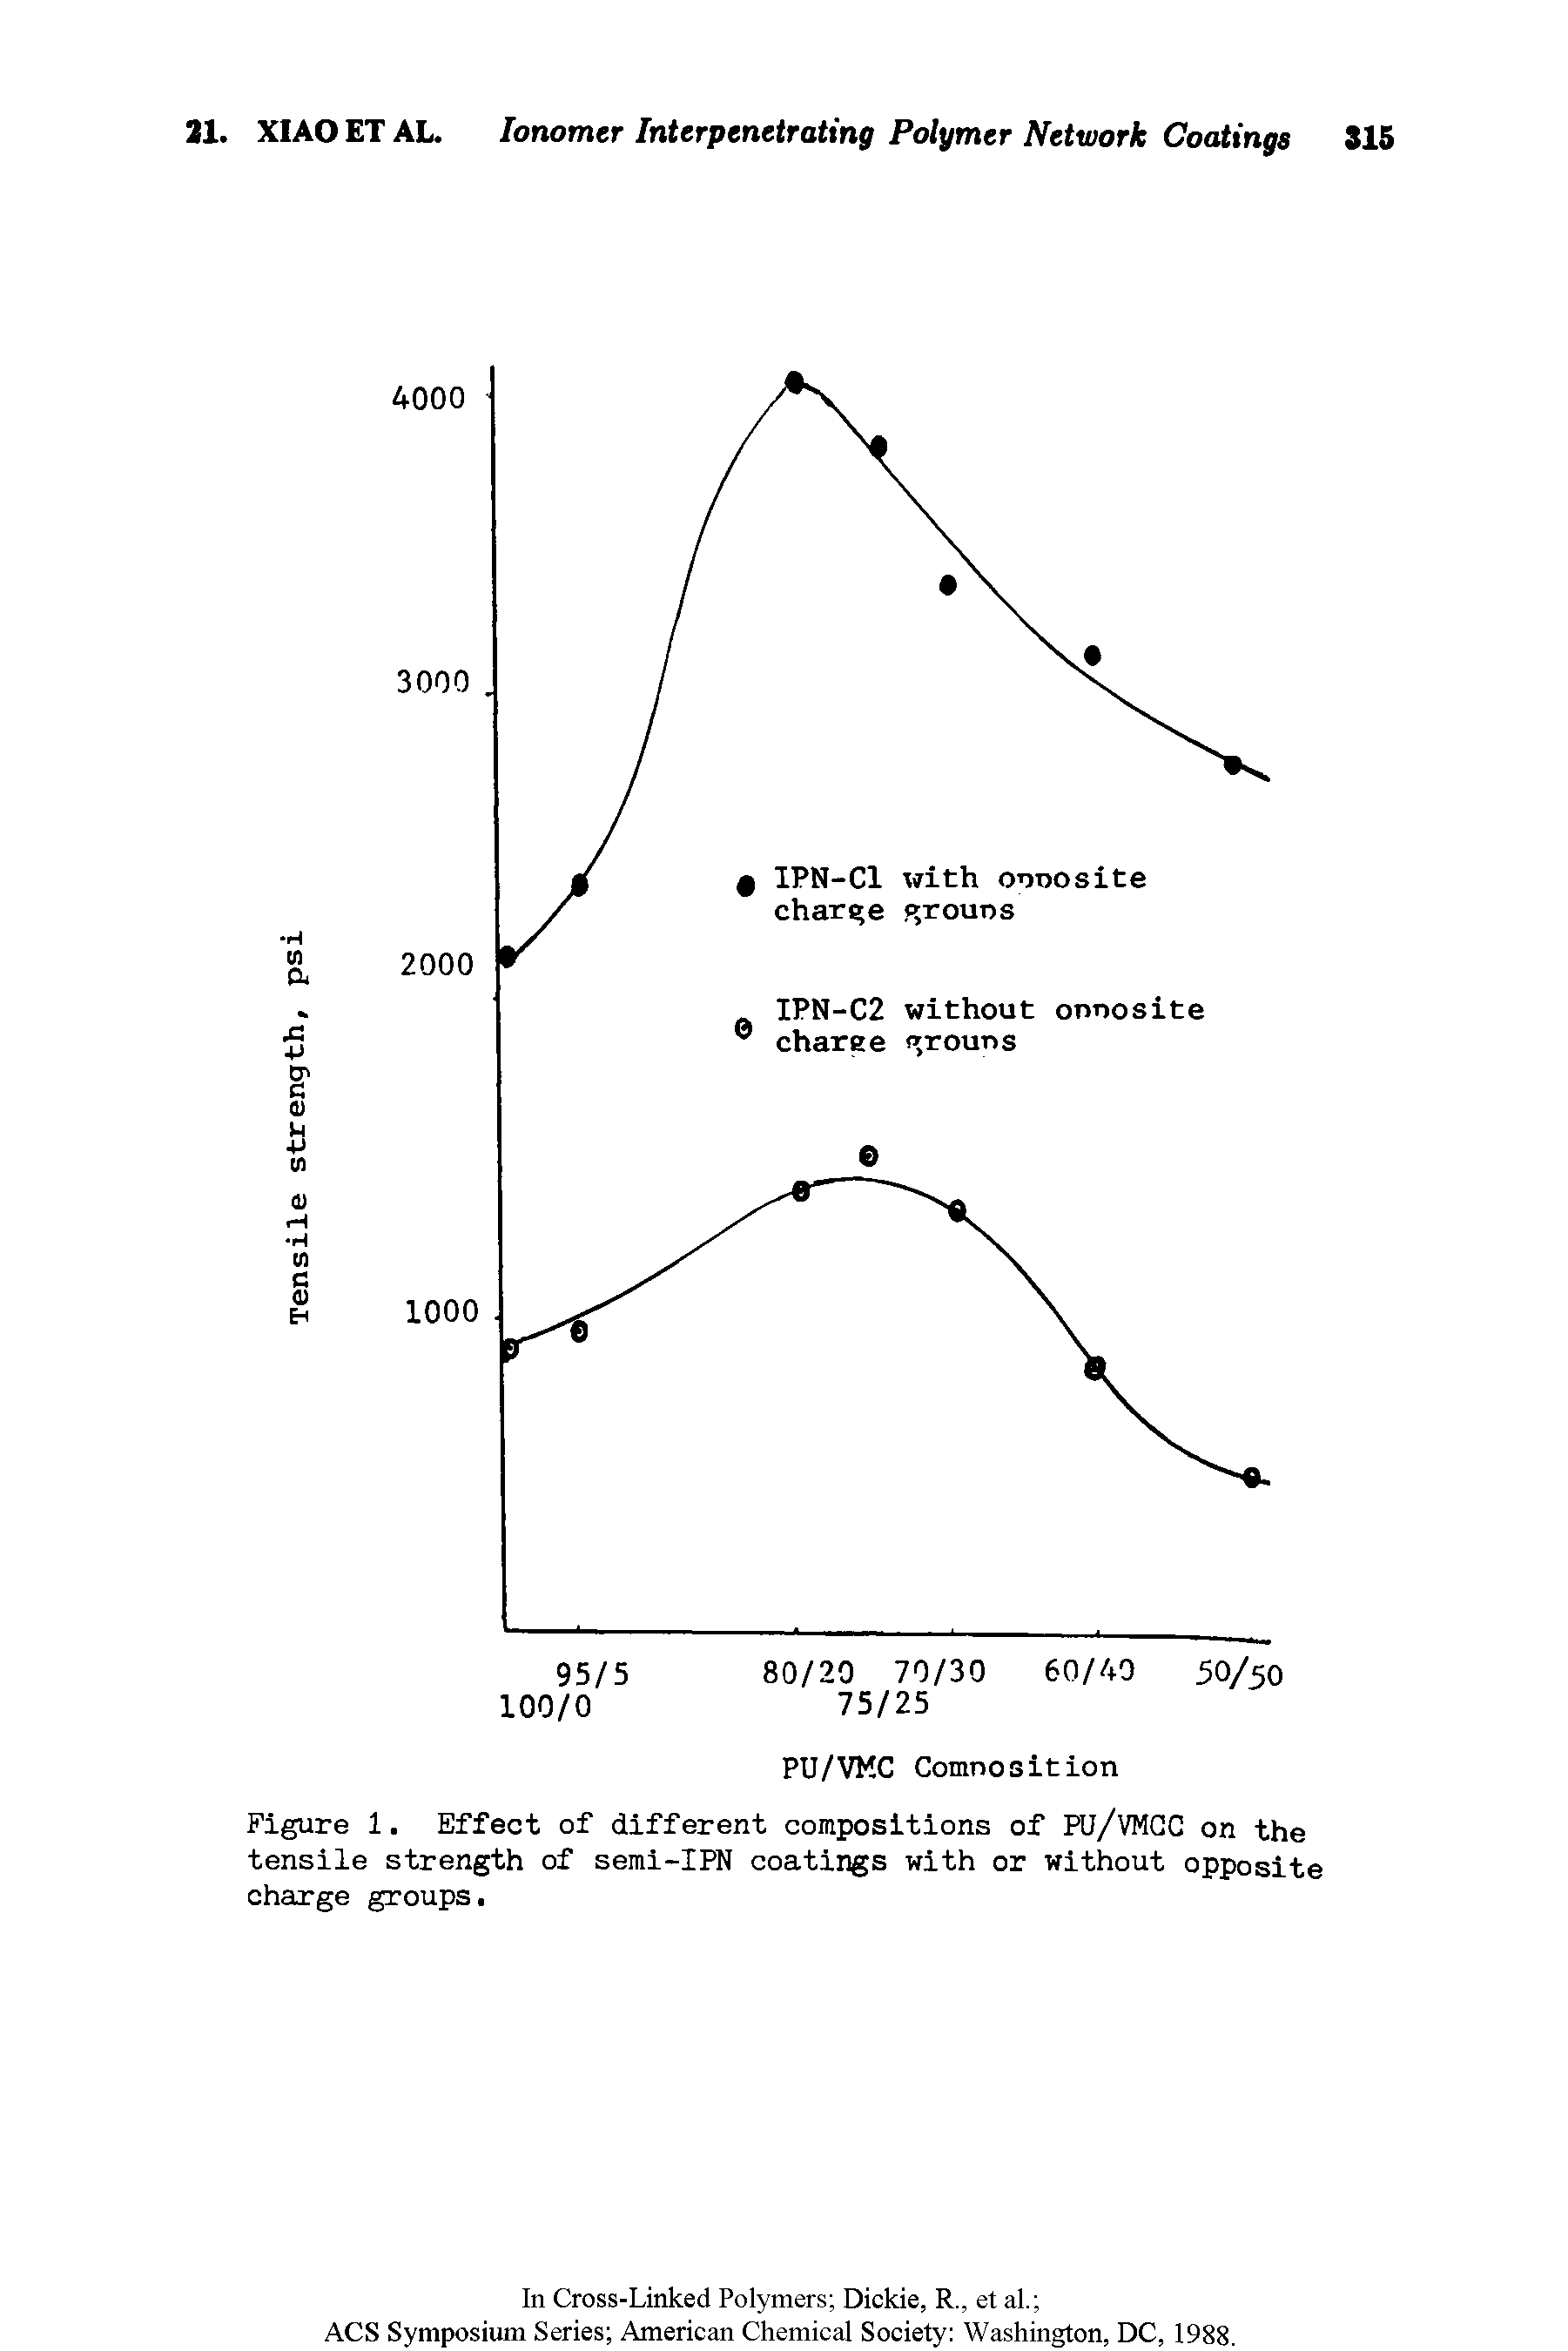 Figure 1. Effect of different compositions of PU/VMGC on the tensile strength of semi-IPN coatings with or without opposite charge groups.